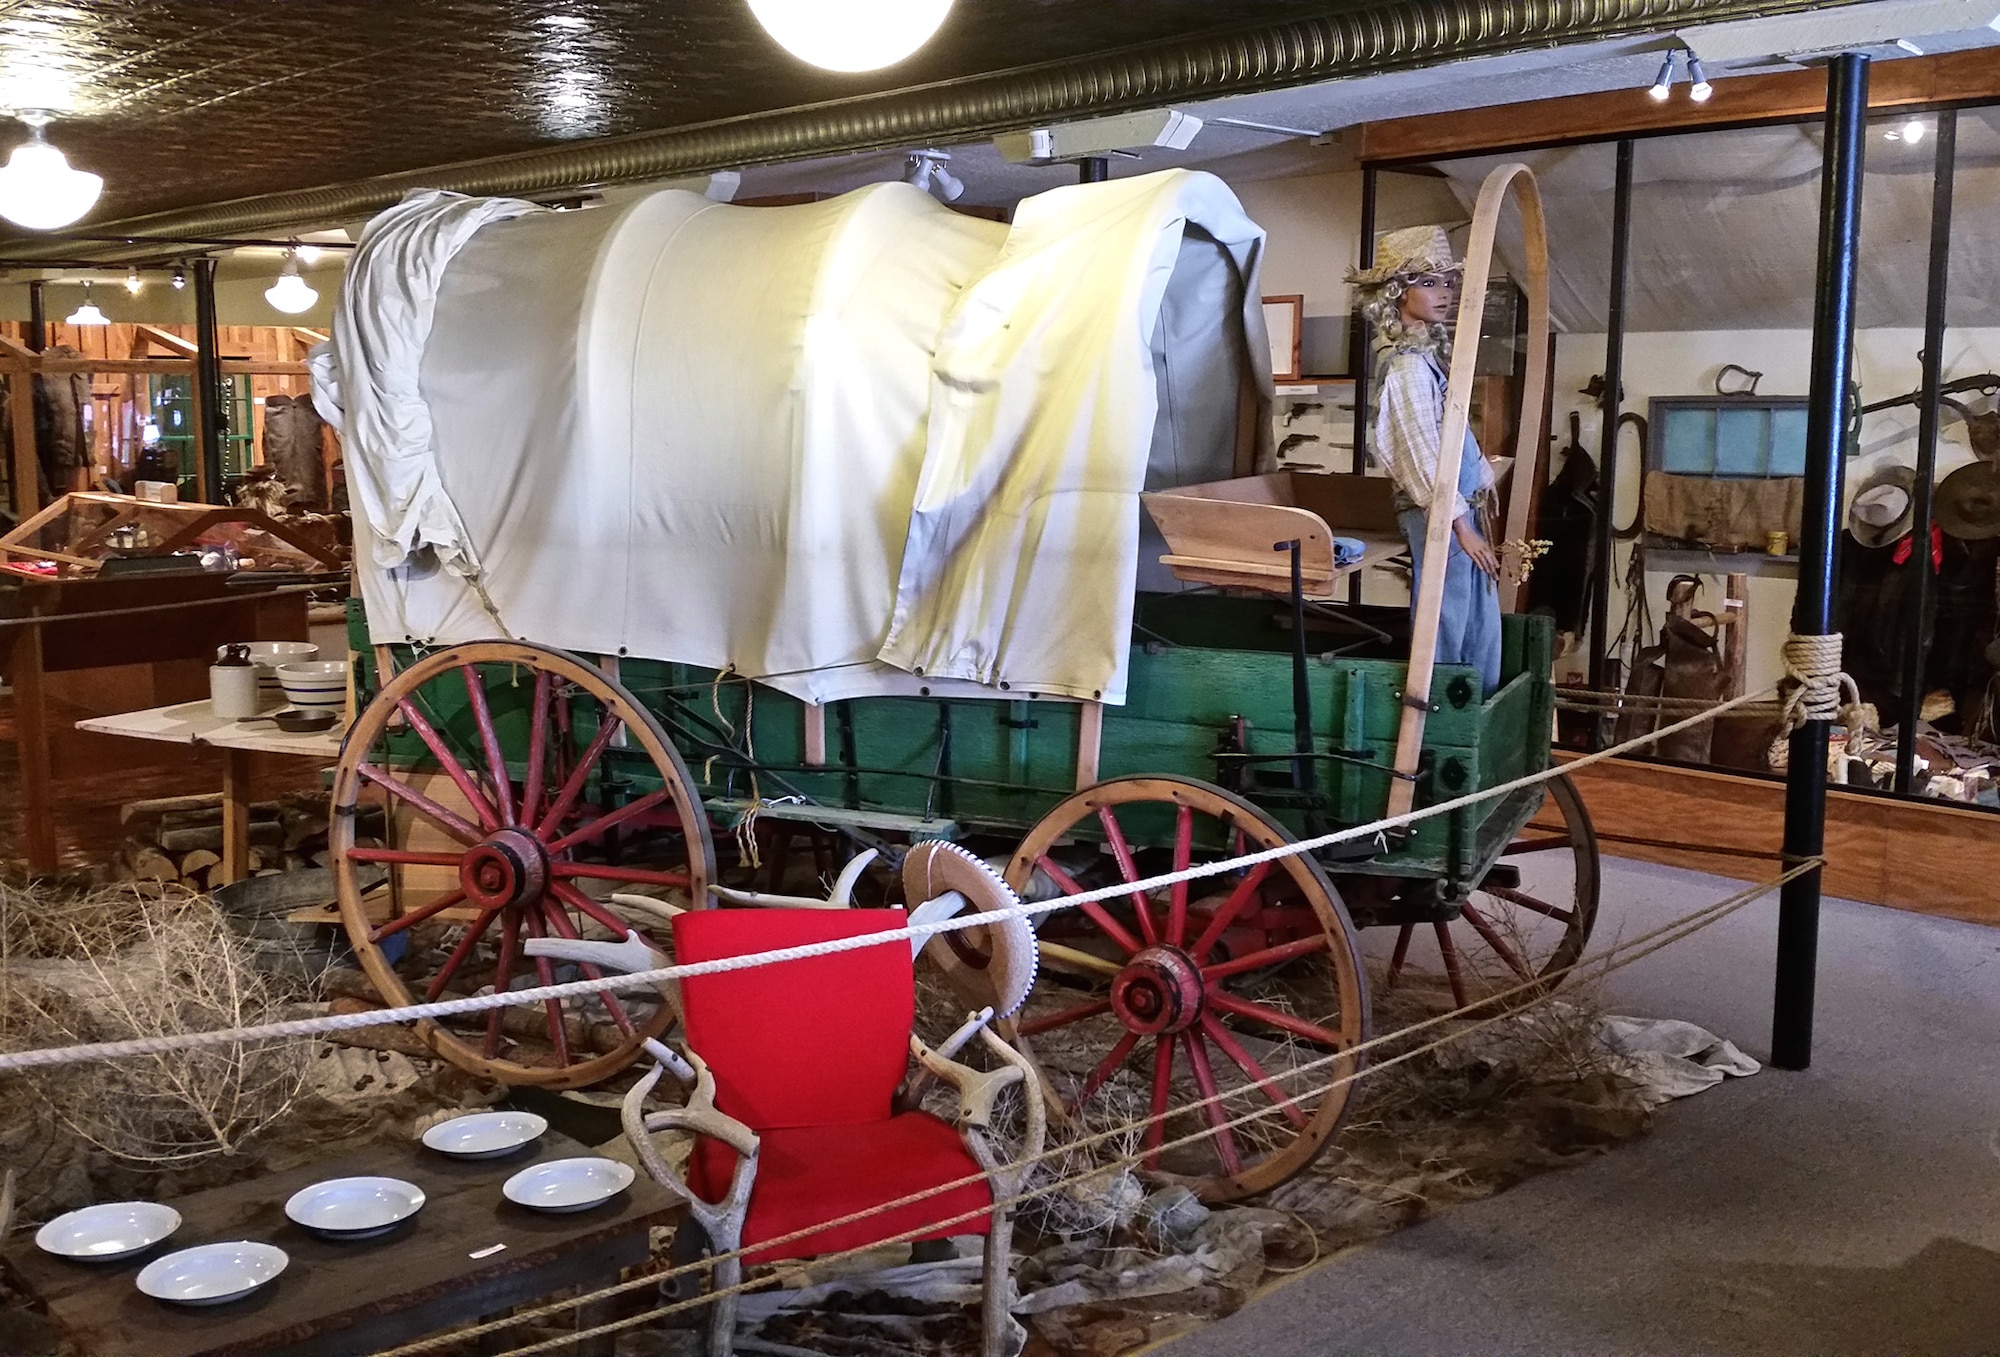 The Frontier Montana museum in Deer Lodge, Mont., showcases a large collection of cowboy and pioneer-related items, and portrays life in Montana from its pre-territorial days through early statehood. (U.S. Air Force photo / John Turner) 